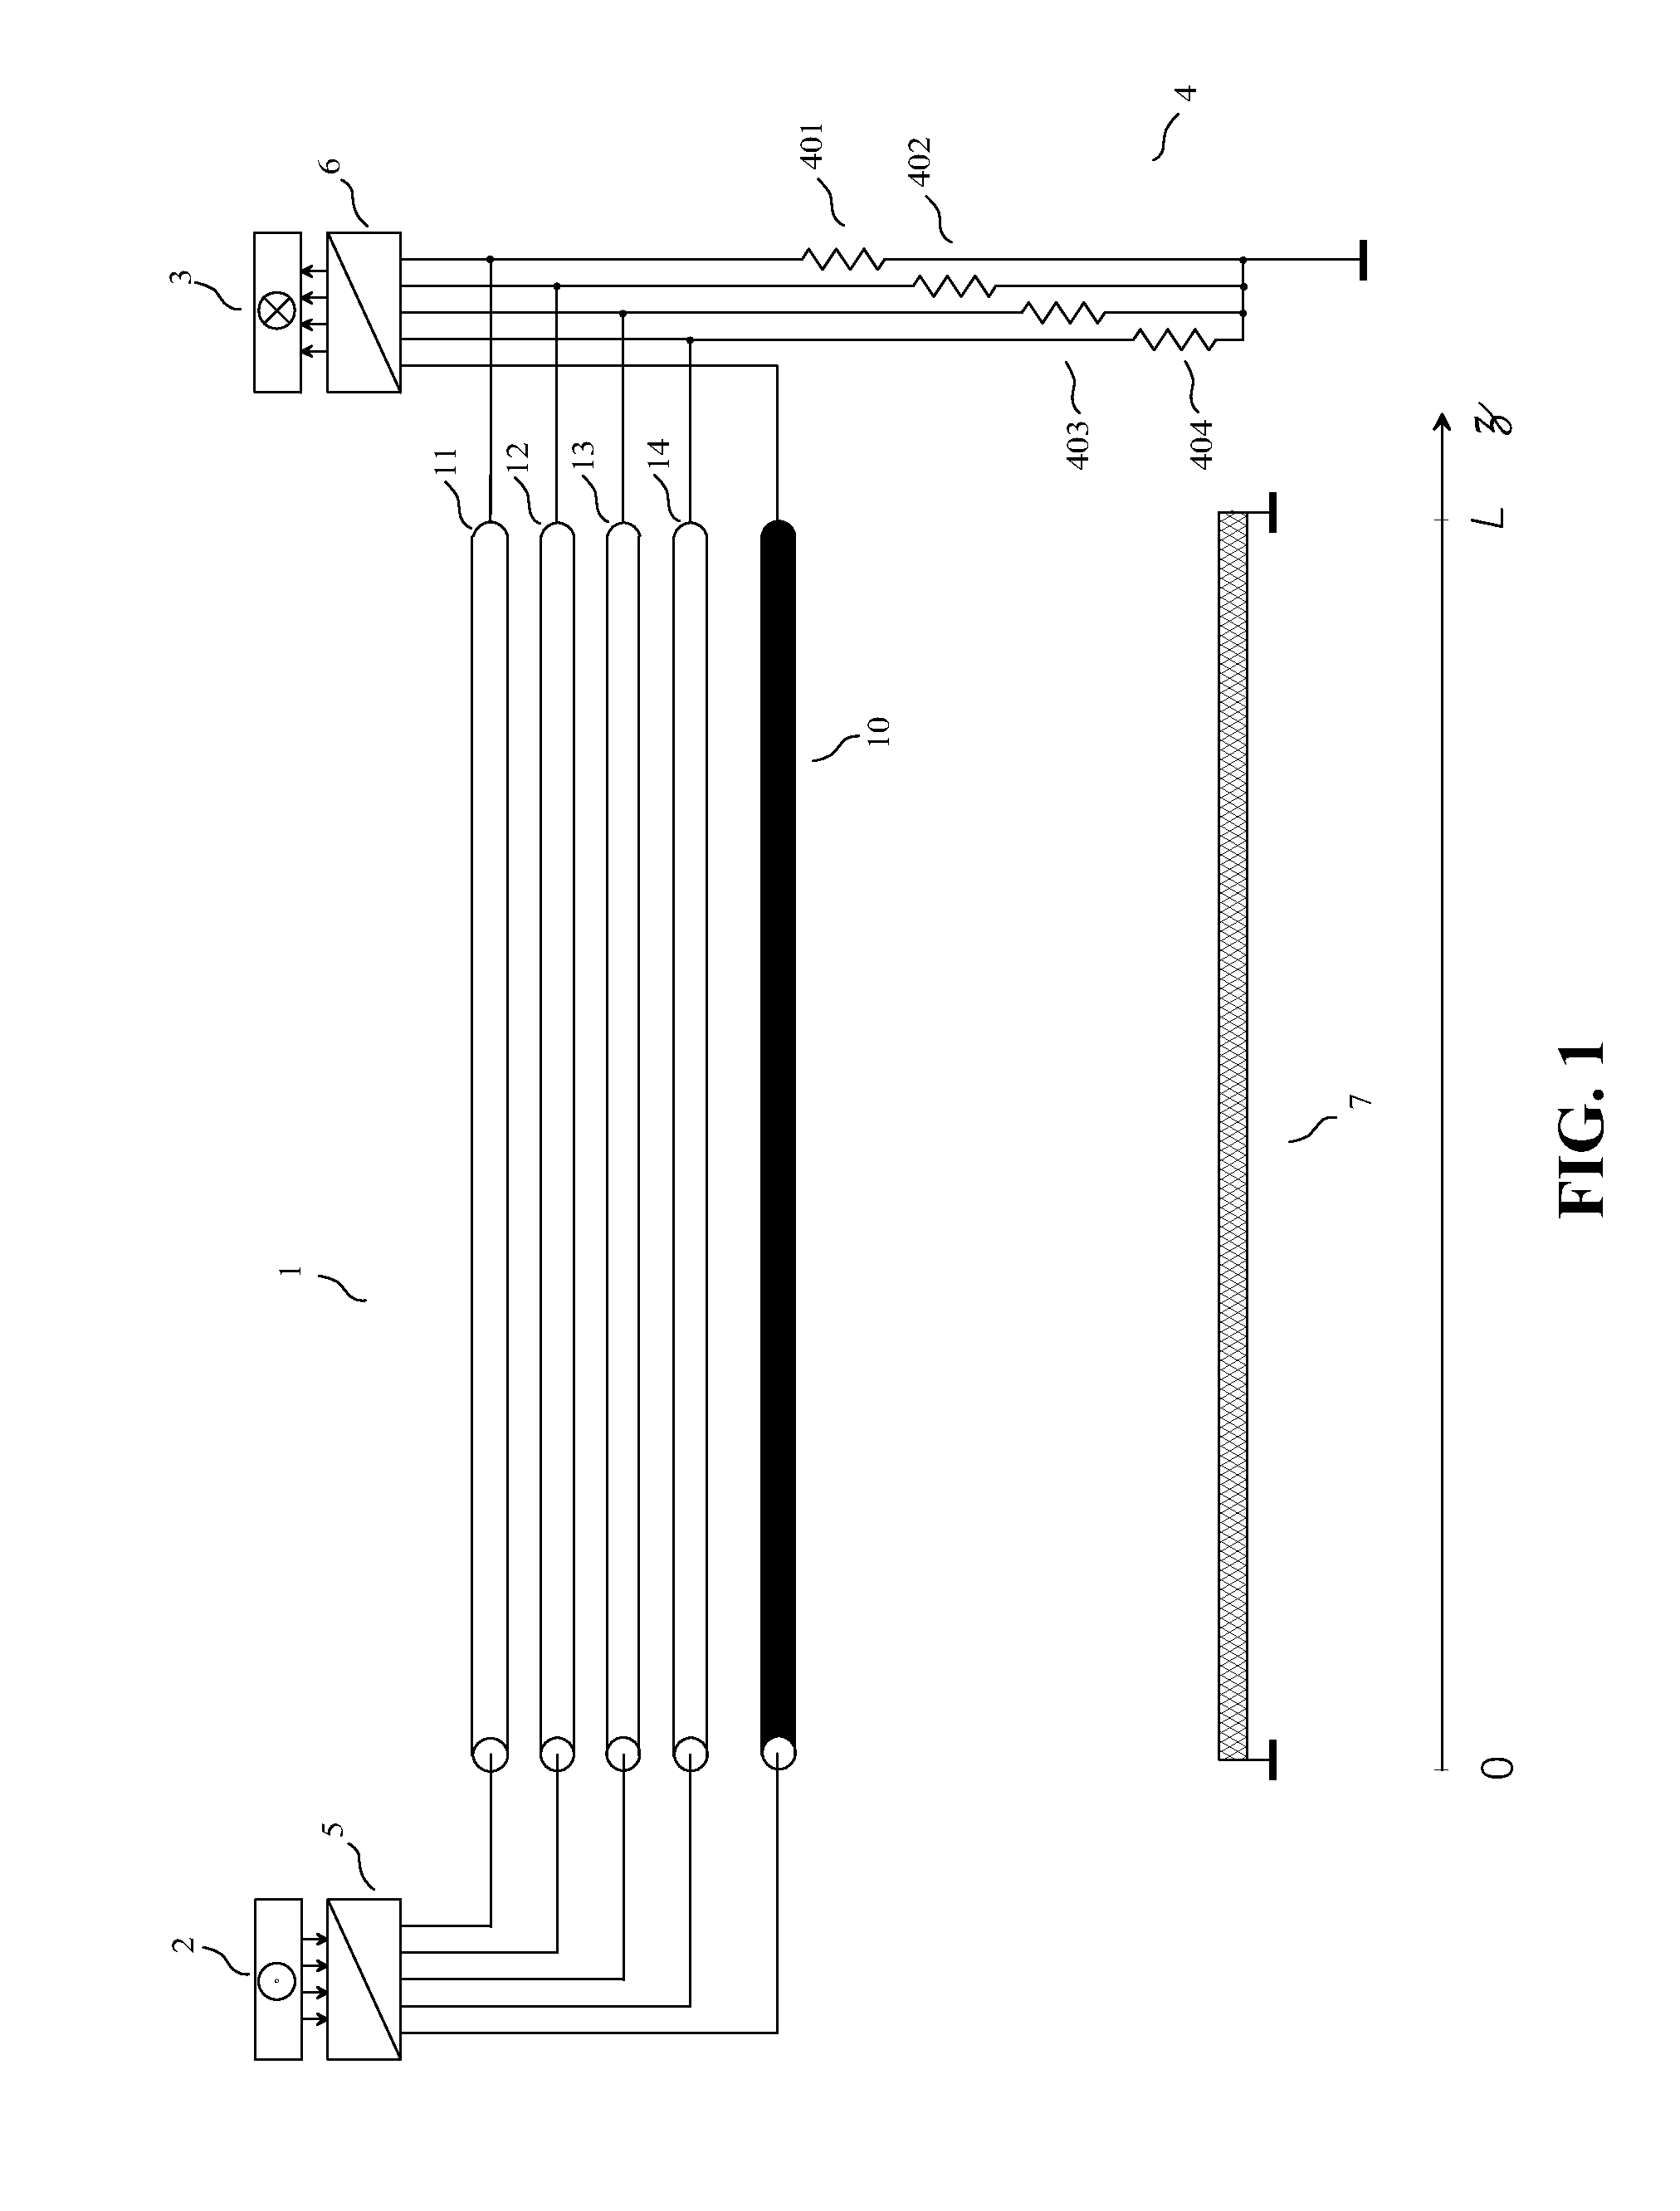 Pseudo-differential interfacing device having a switching circuit